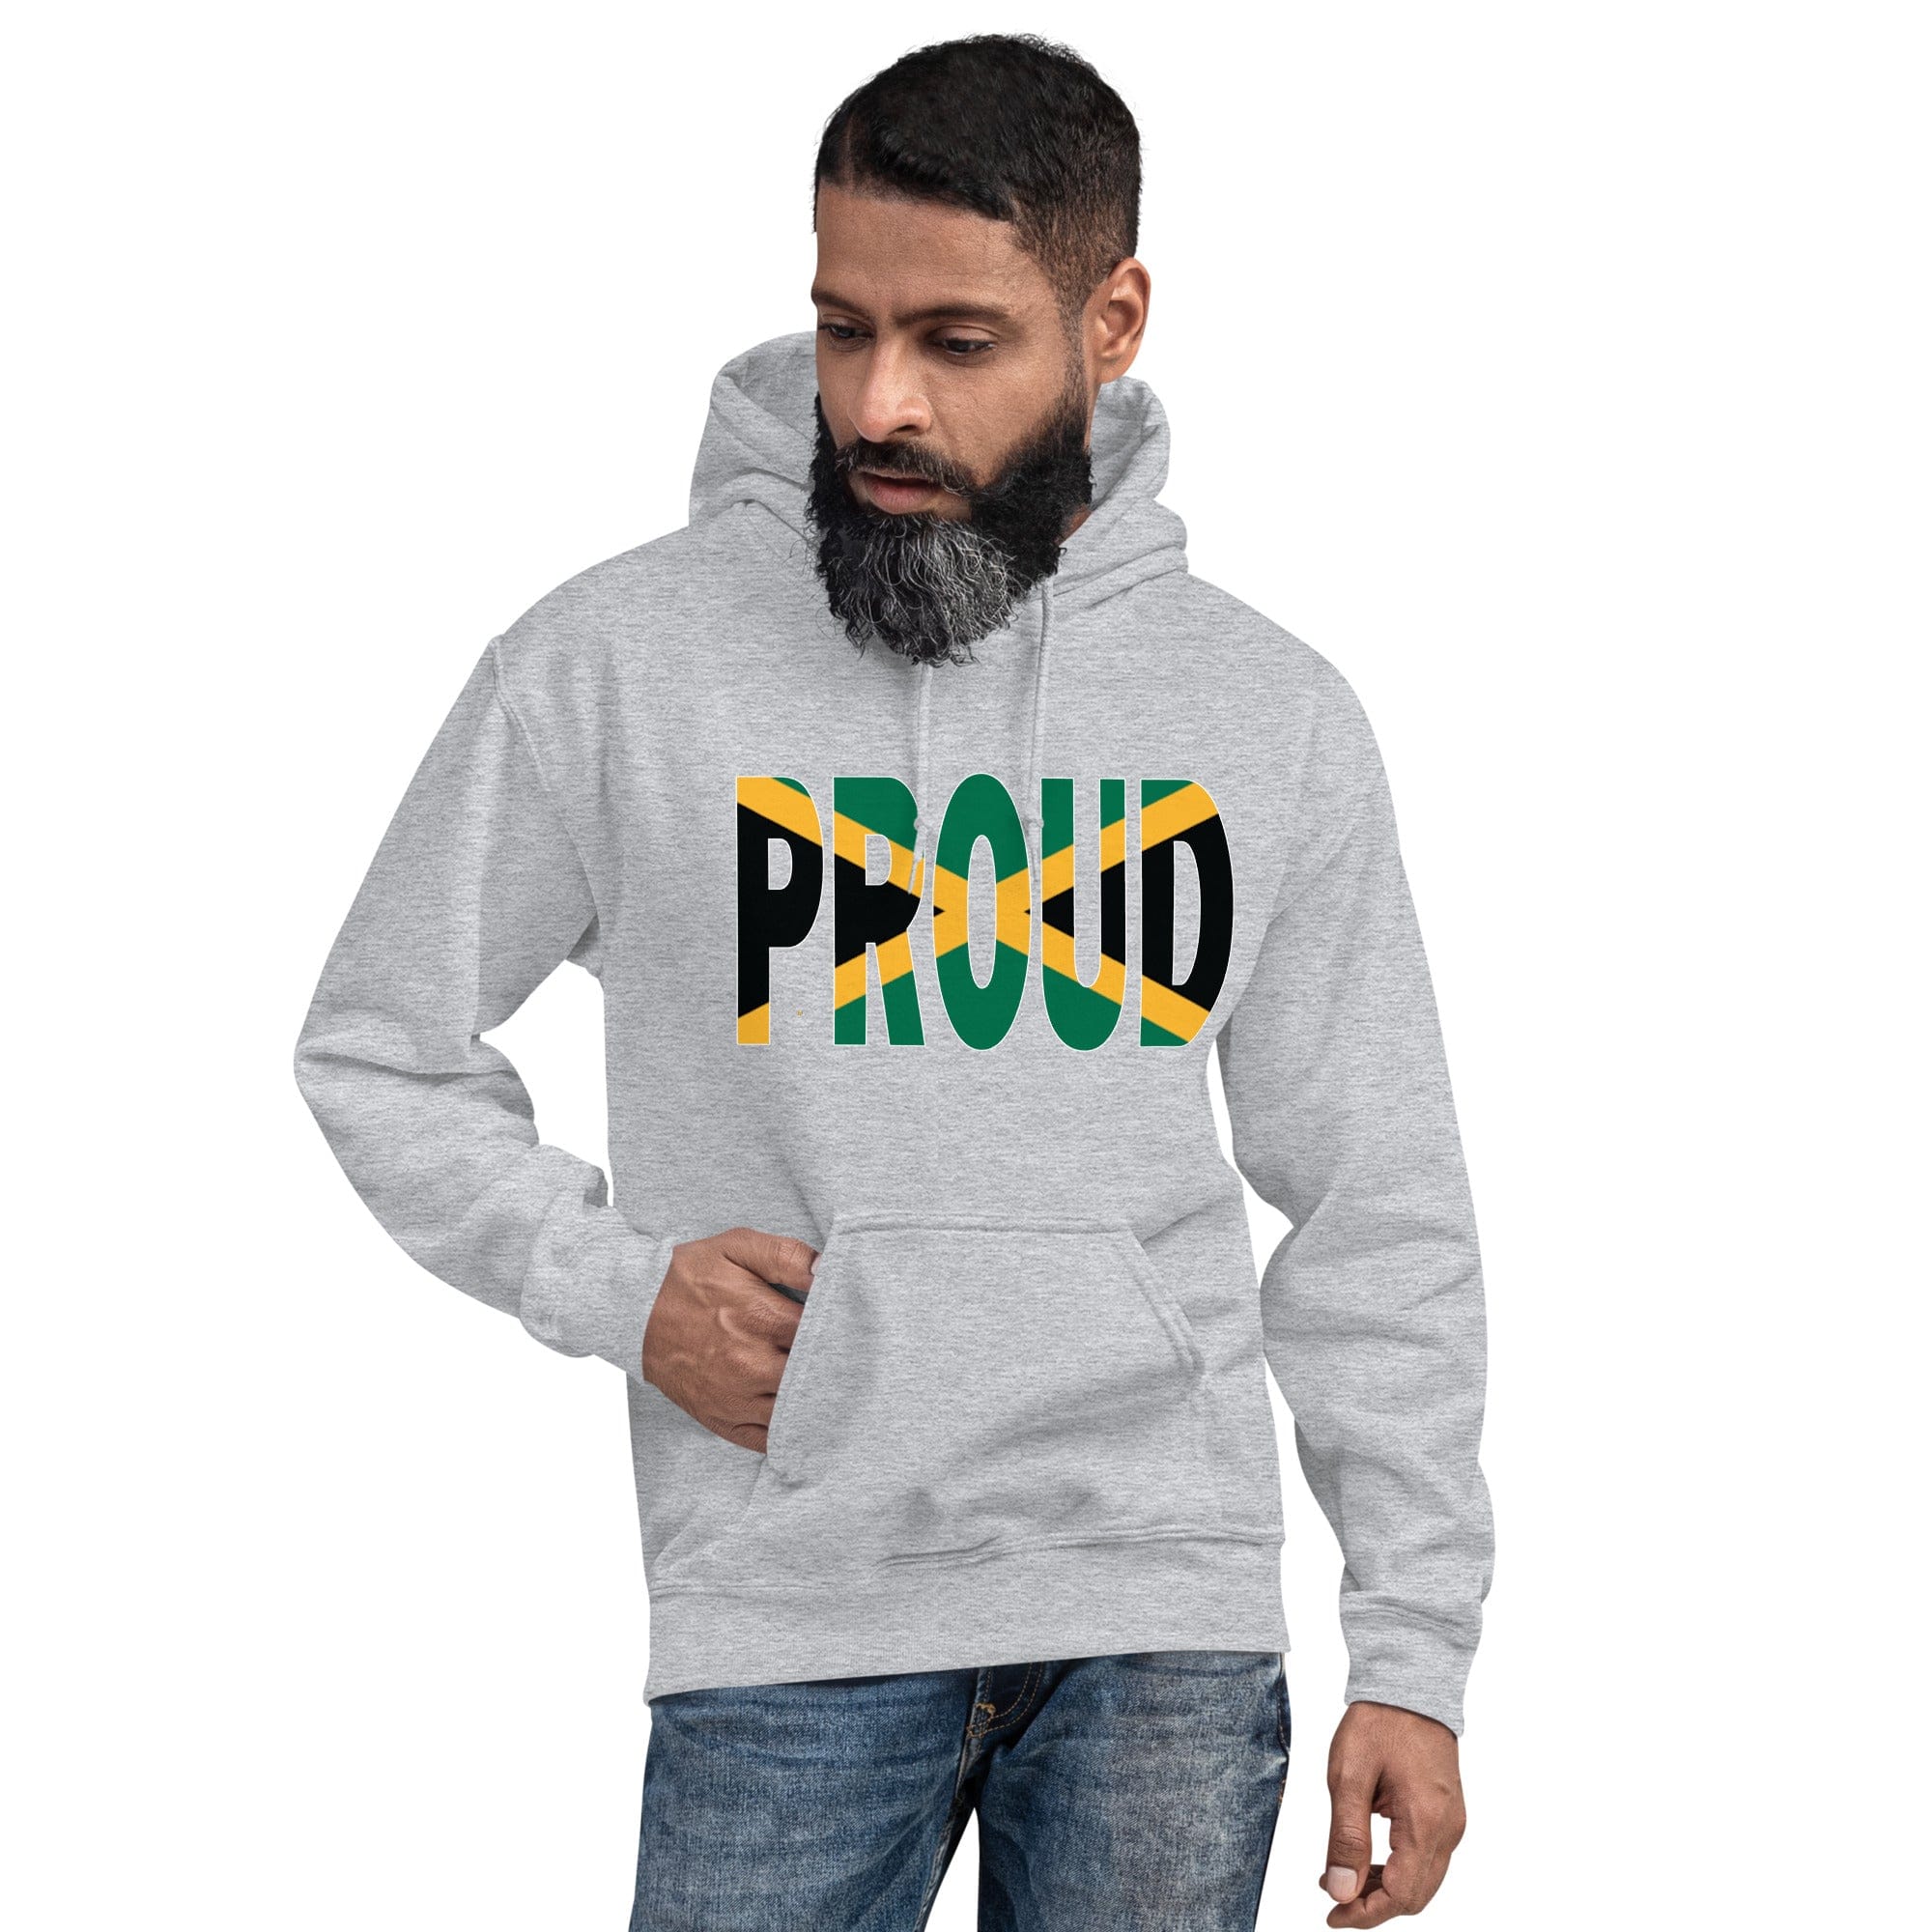 Jamaica sport grey color Hoodie with a Jamaican flag spelling the word proud on the front worn by a black man.